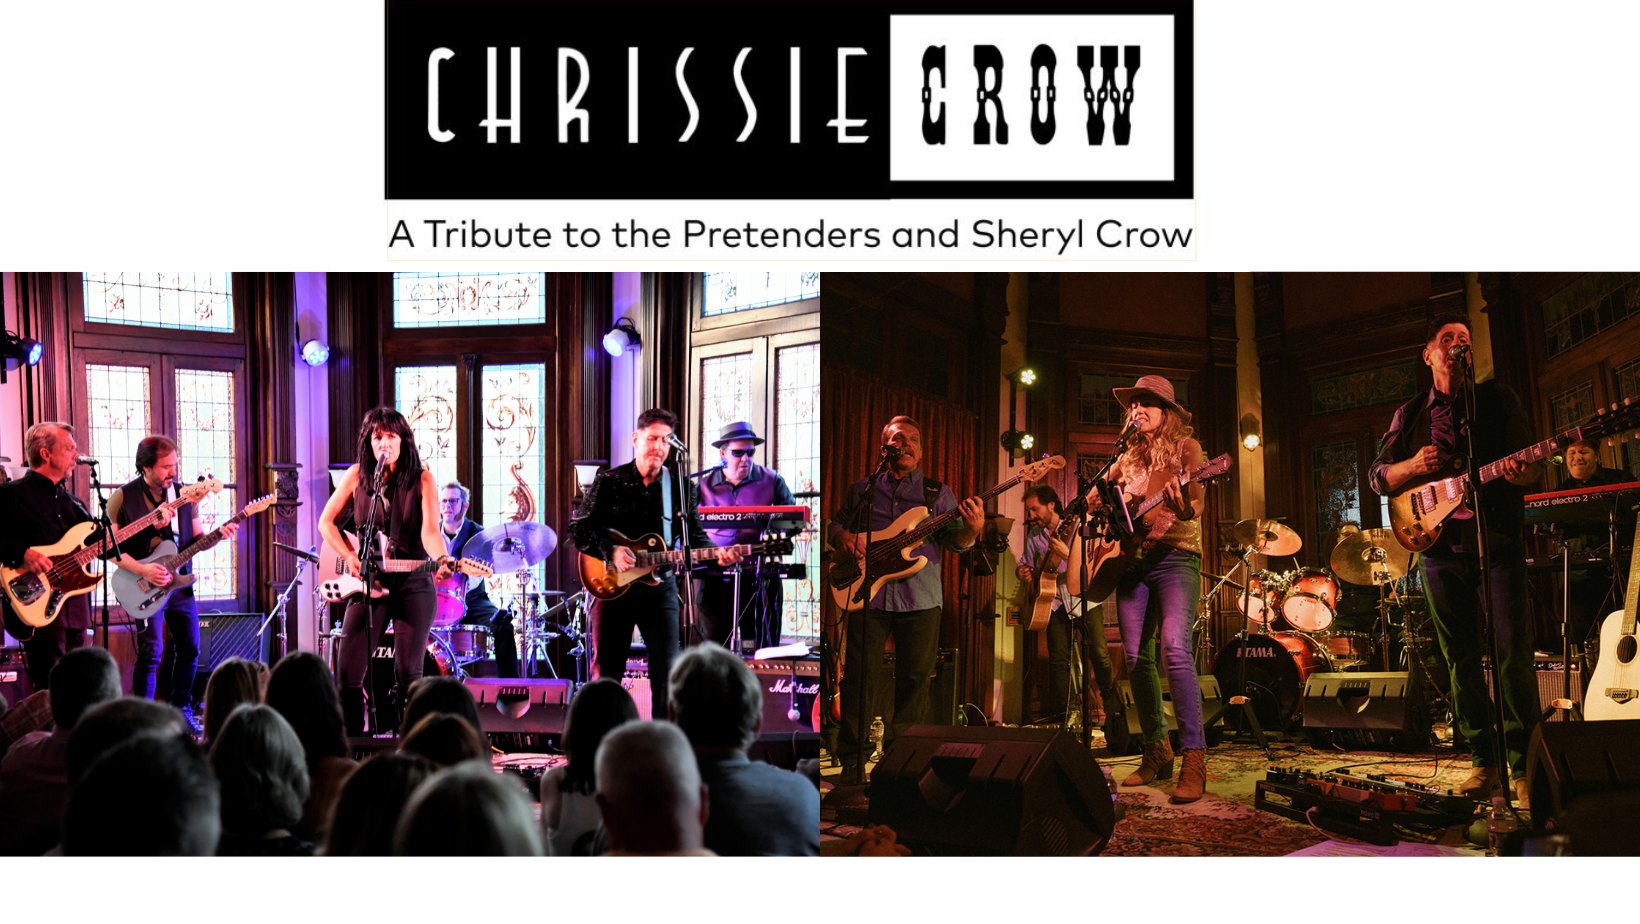 SAT. APR. 13: Chrissie Crow- A Tribute To Sheryl Crow and the Pretenders